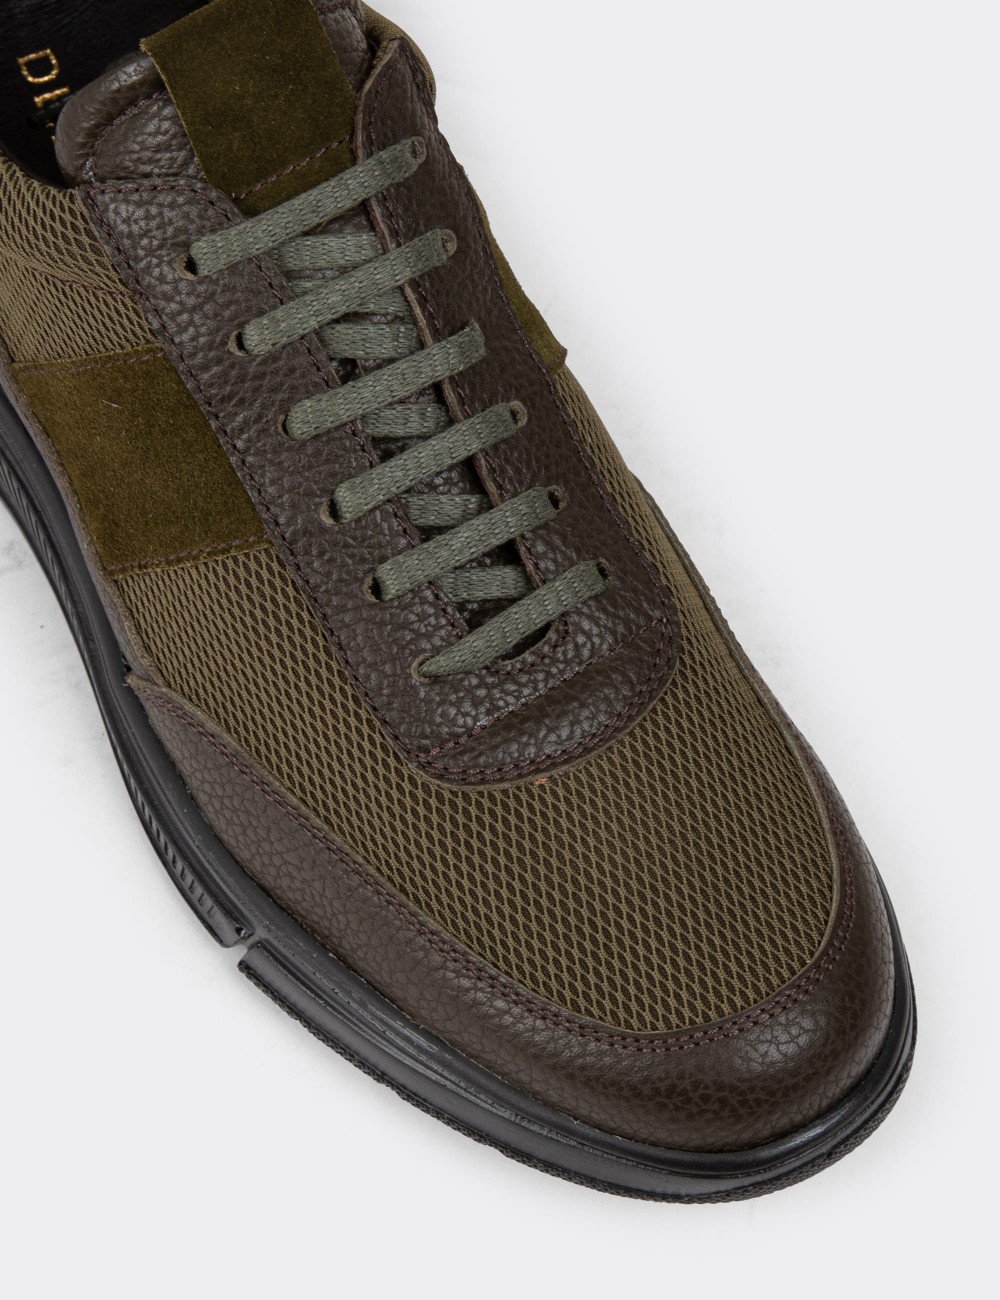 Green Leather Sneakers - 01963MYSLC01